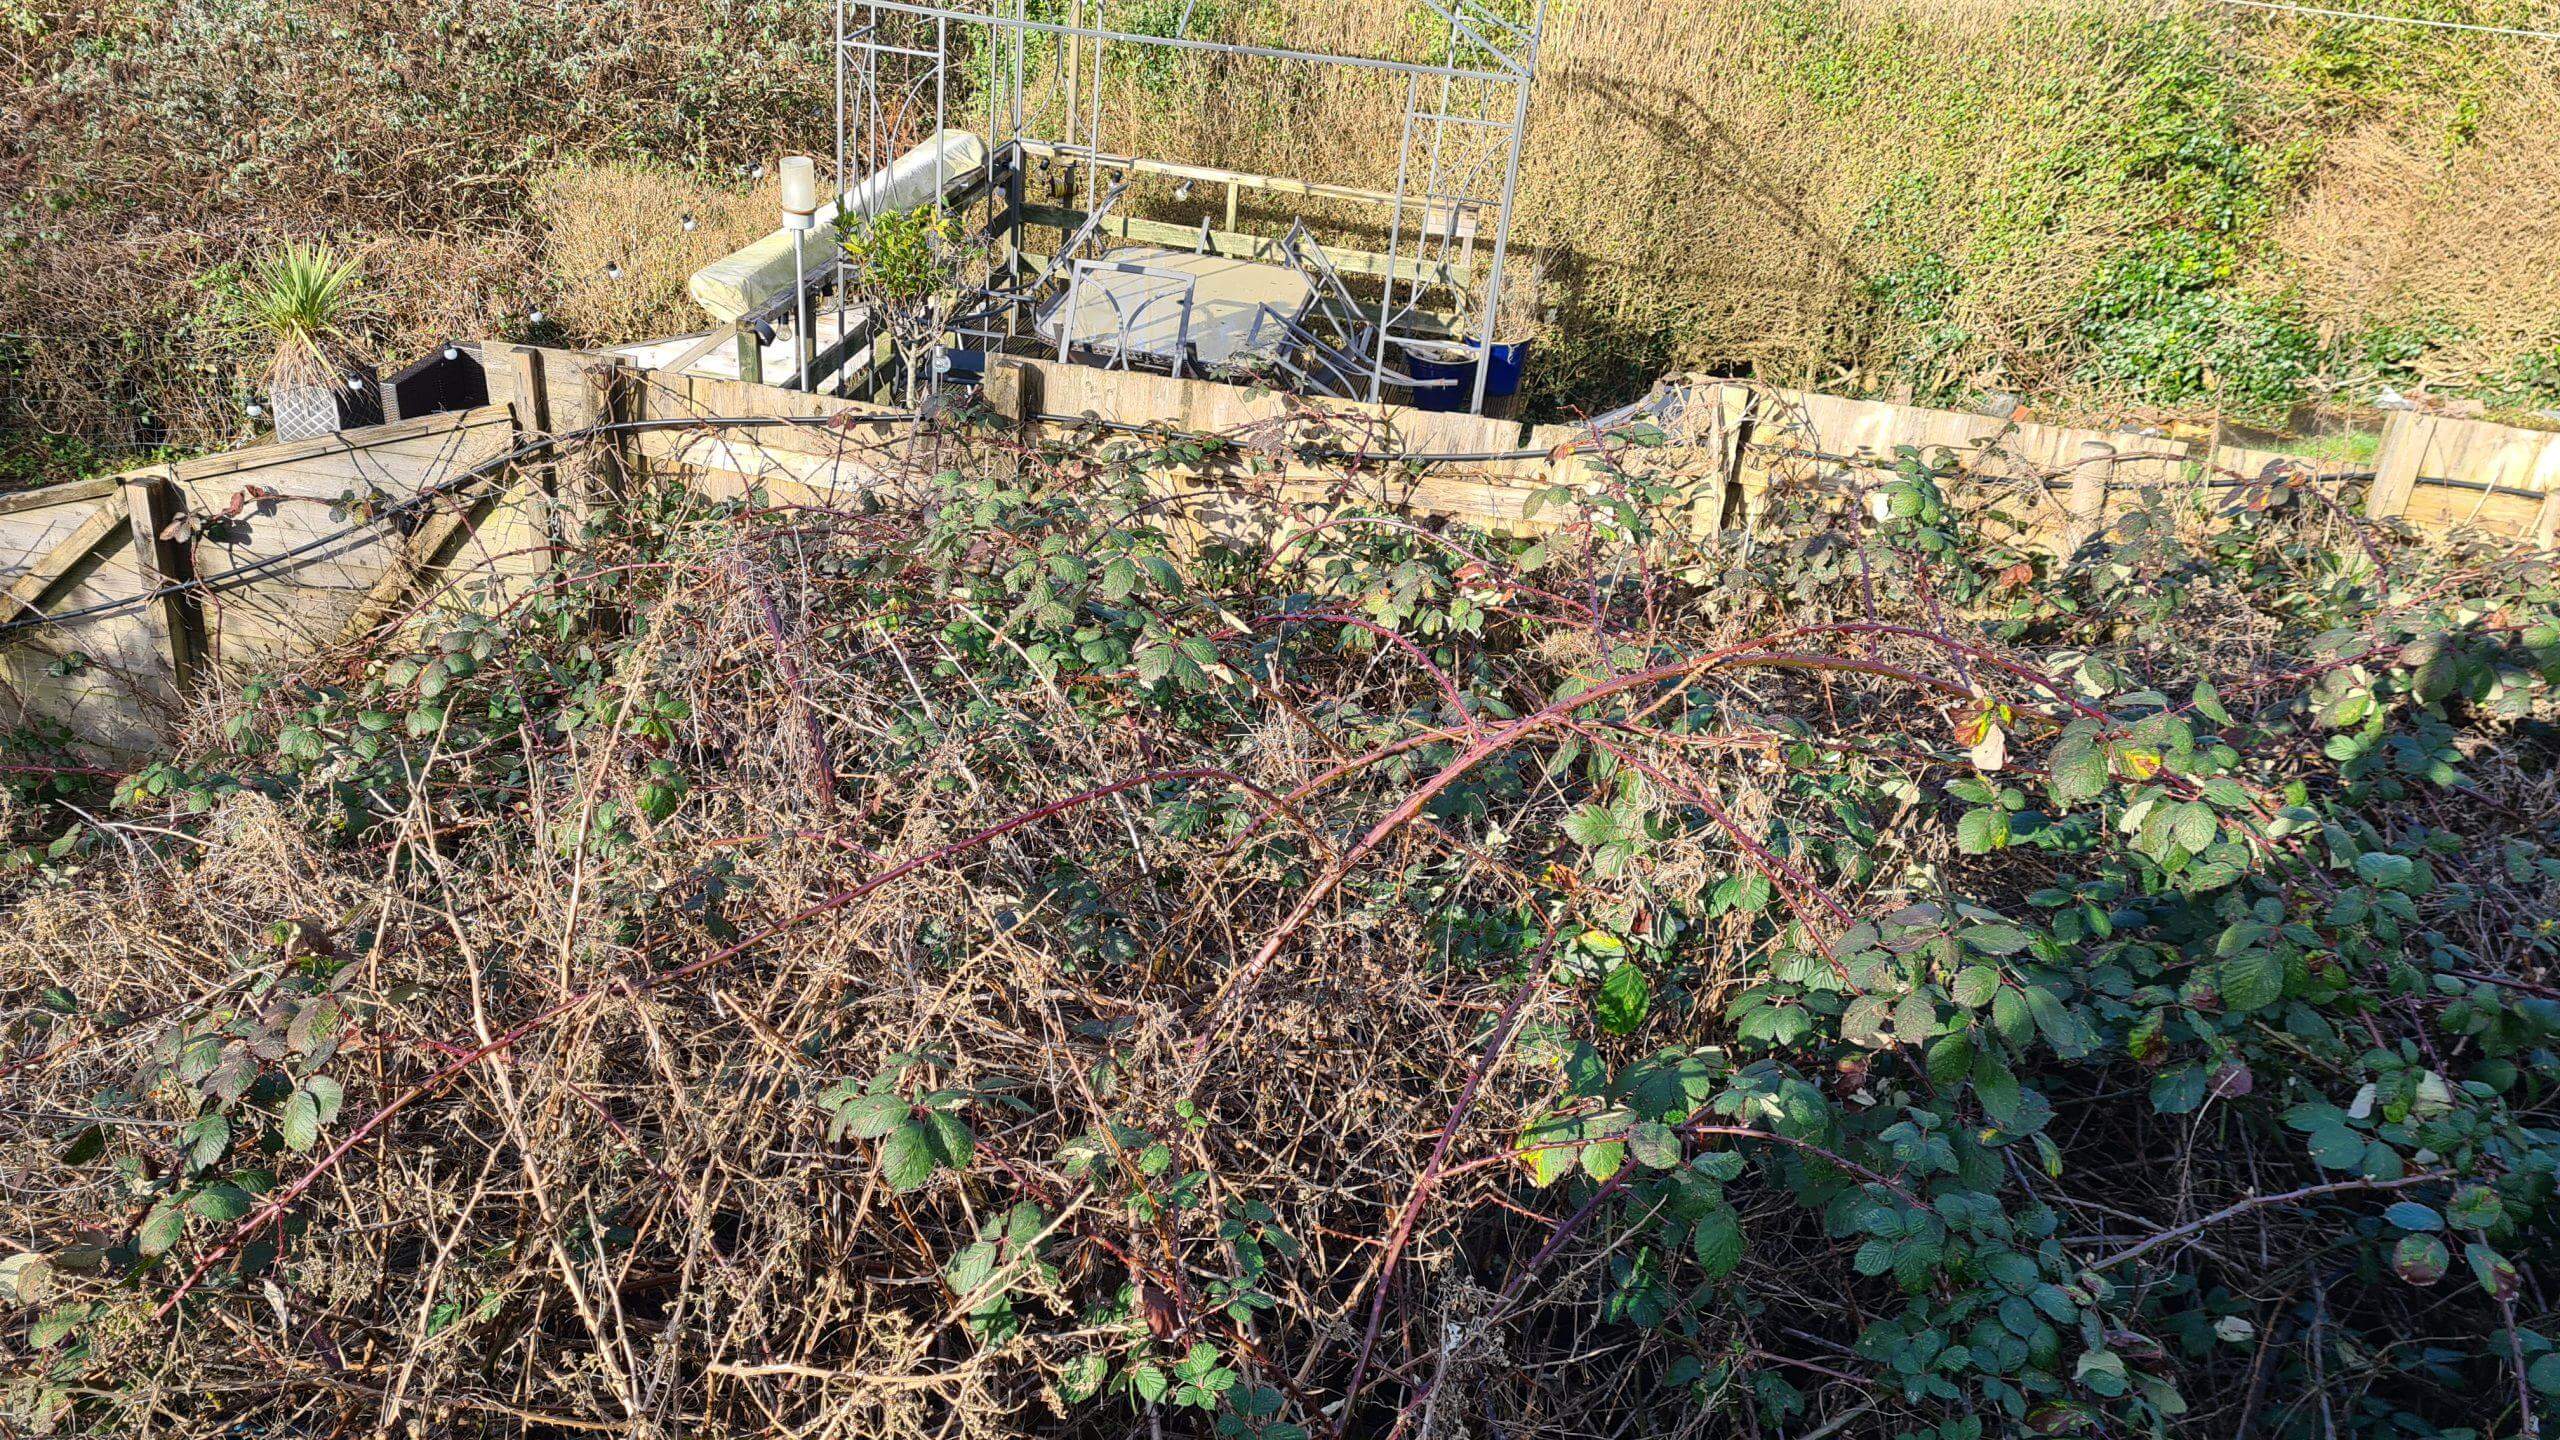 Garden consumed with brambles and various other invasive weeds